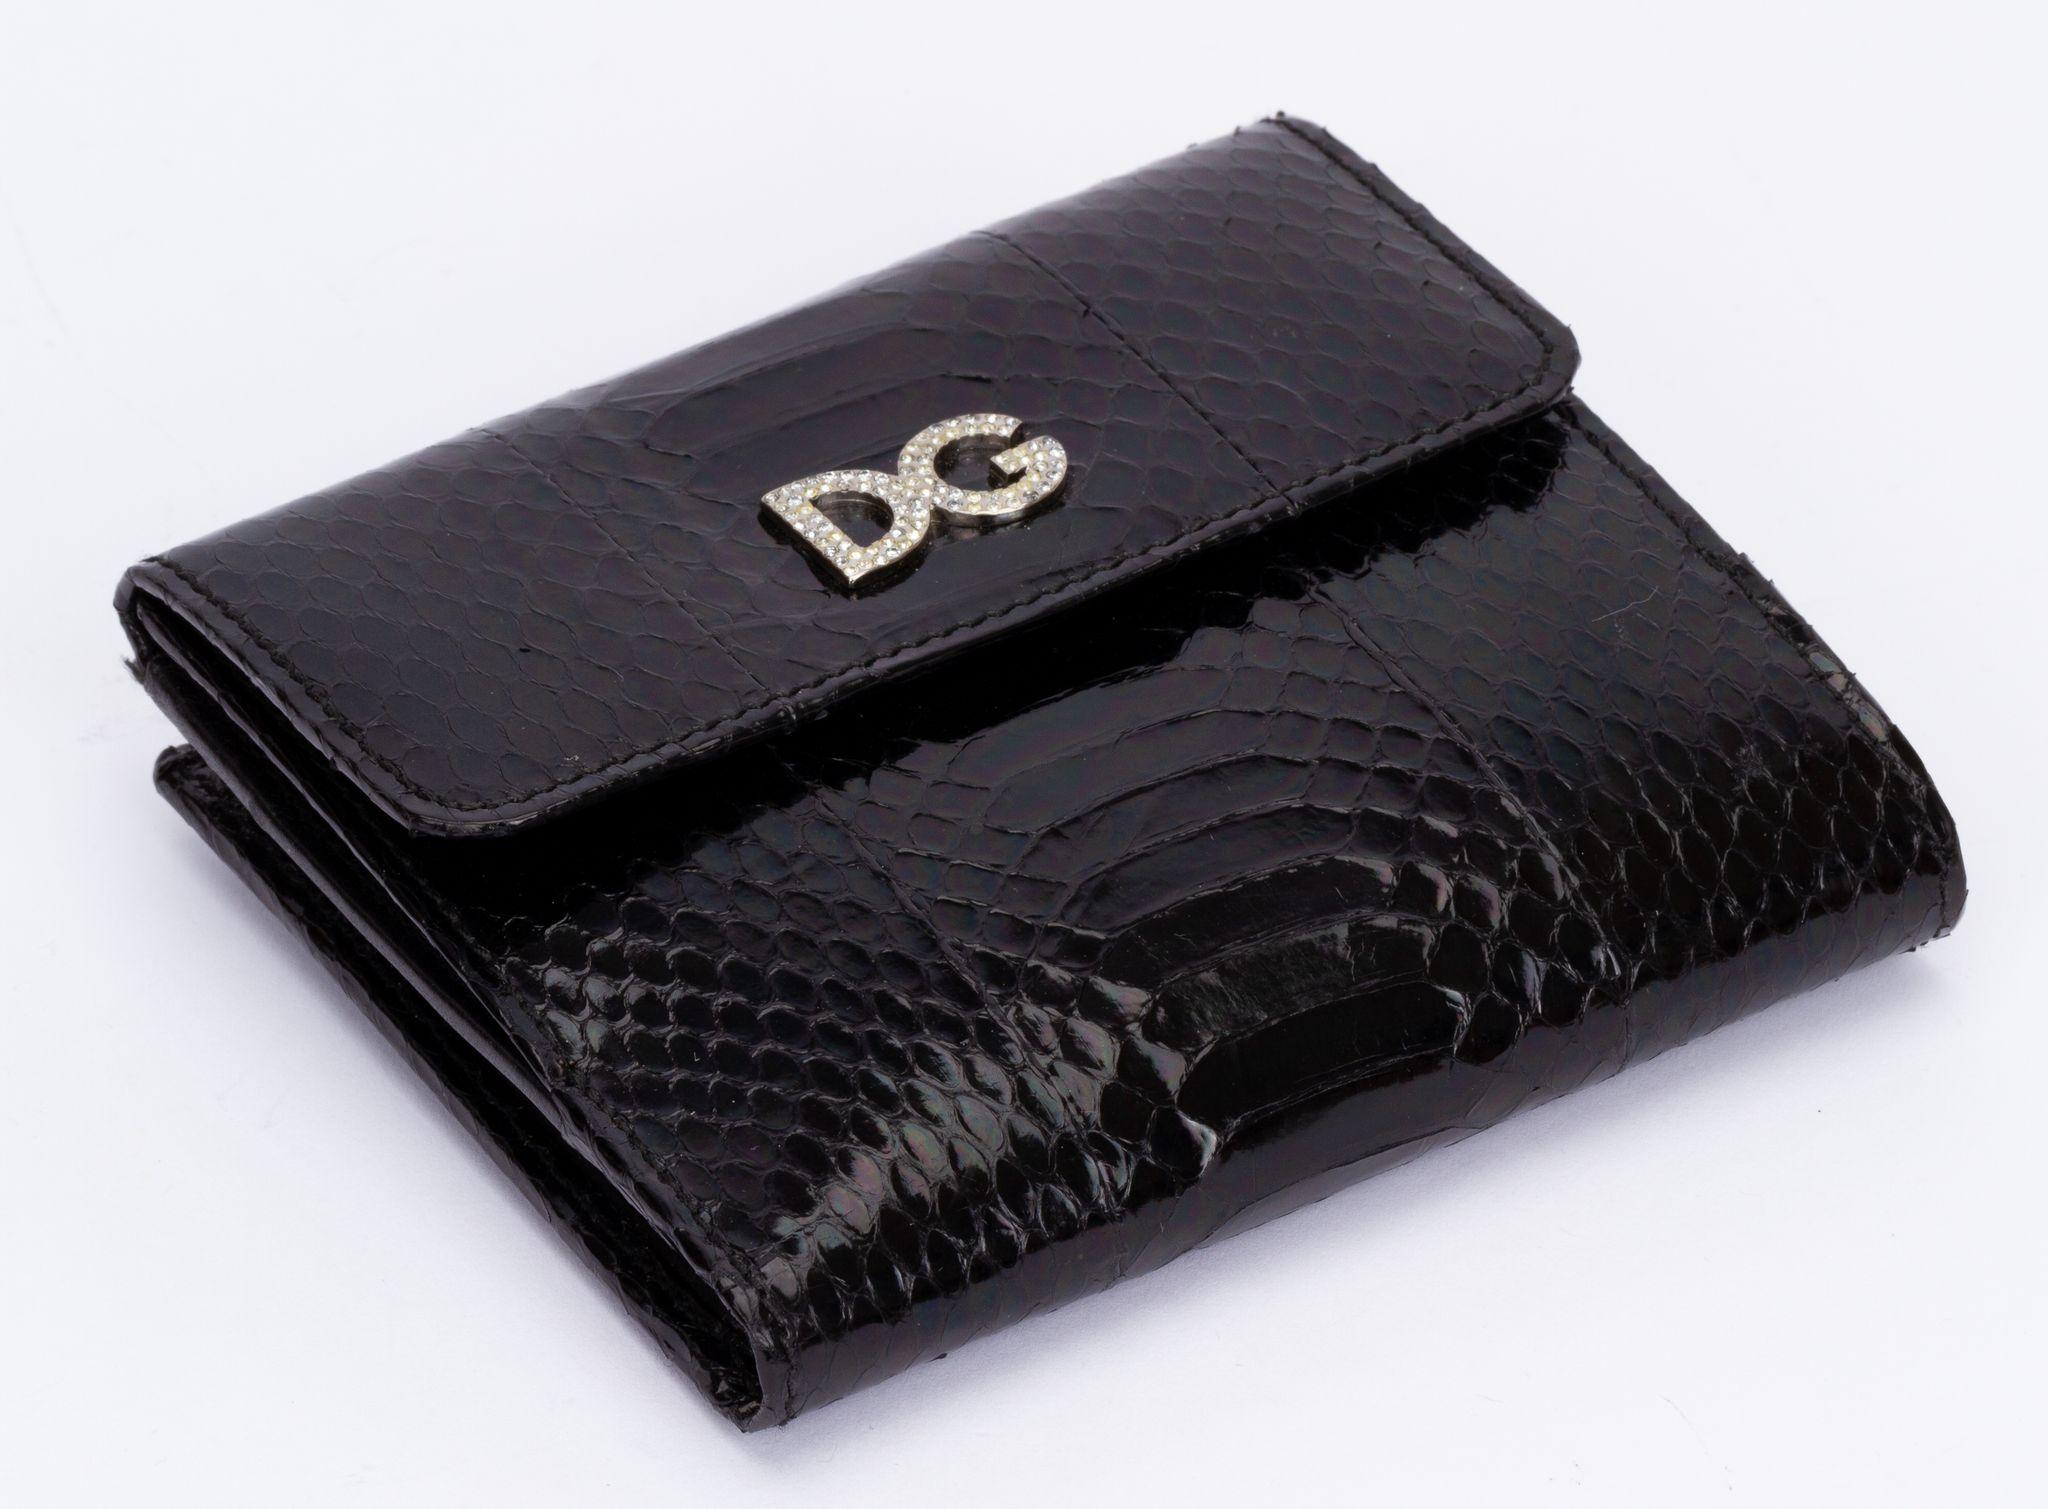 Dolce & Gabbana wallet in black made out of python skin. On the front is a DG logo featuring small crystals. It closes with a press button. The inside is decorated with severals card holders and a zipped pocket as well as part for money. It is brand